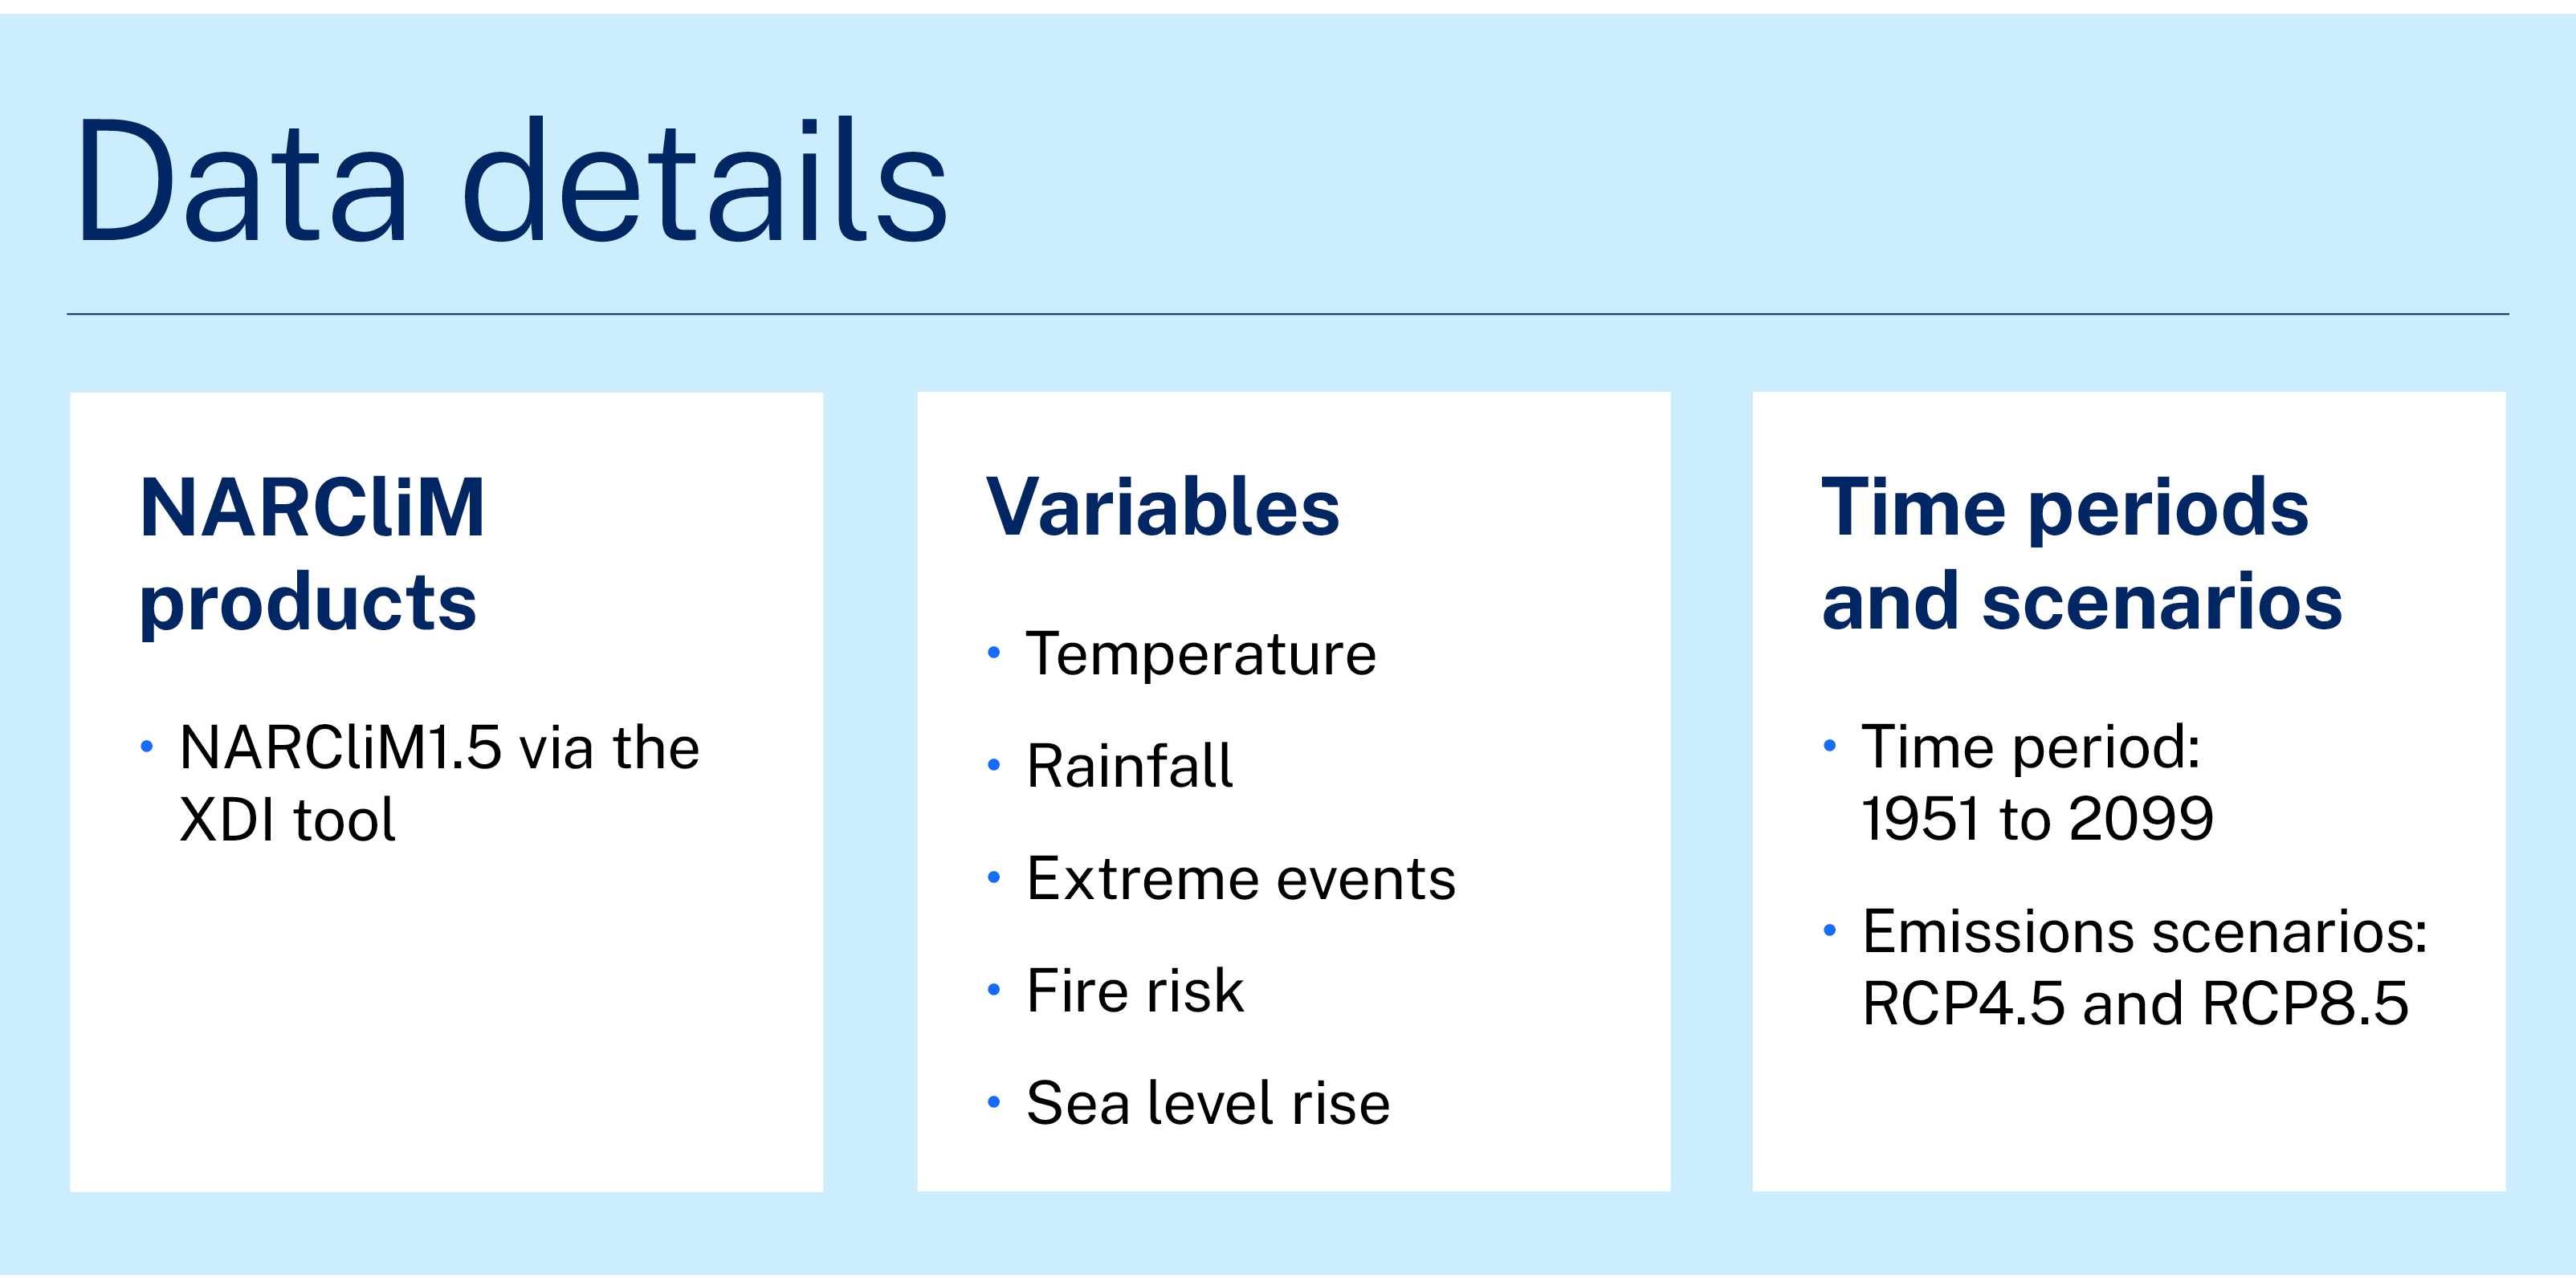 Data details. NARCliM products. NARCliM1.5 via the XDI tool. Variables, Temperature, Rainfall, Extreme events, Fire risk, Sea level rise. Time periods and scenarios. Time period: 1951 to 2099. Emissions scenarios: RCP4.5 and RCP8.5 